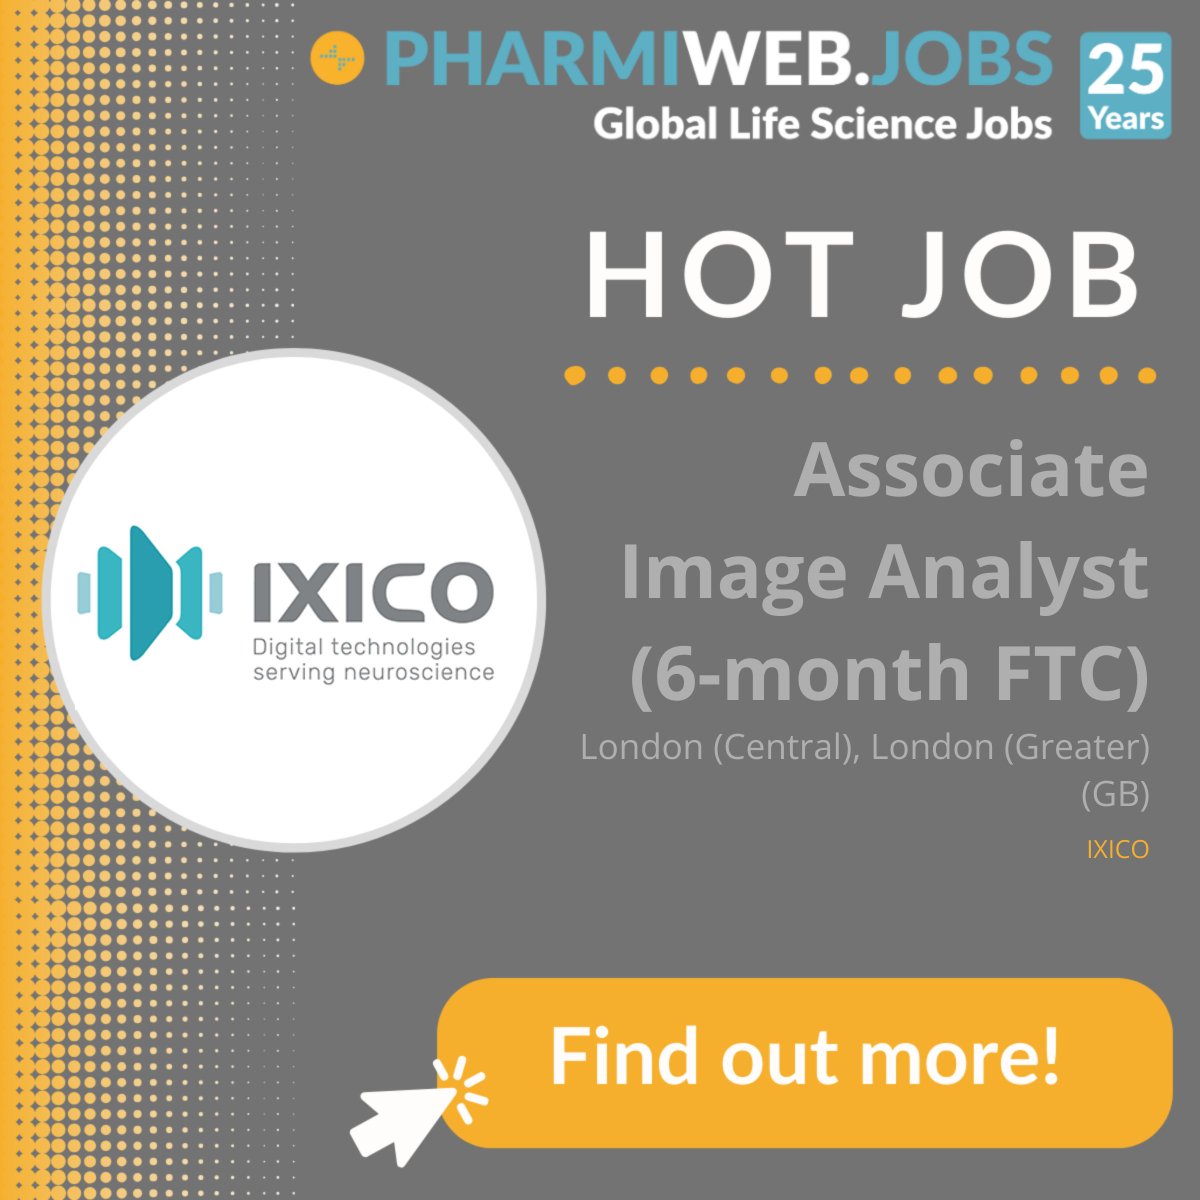 IXICO, a leading neuroimaging CRO, is currently hiring an Associate Image Analyst to help them deliver their medical image analysis solutions to large clinical trials. Find out more and apply now: buff.ly/3vXfttO #ixico #neuroimaging #clinicaltrials #medicalimaging